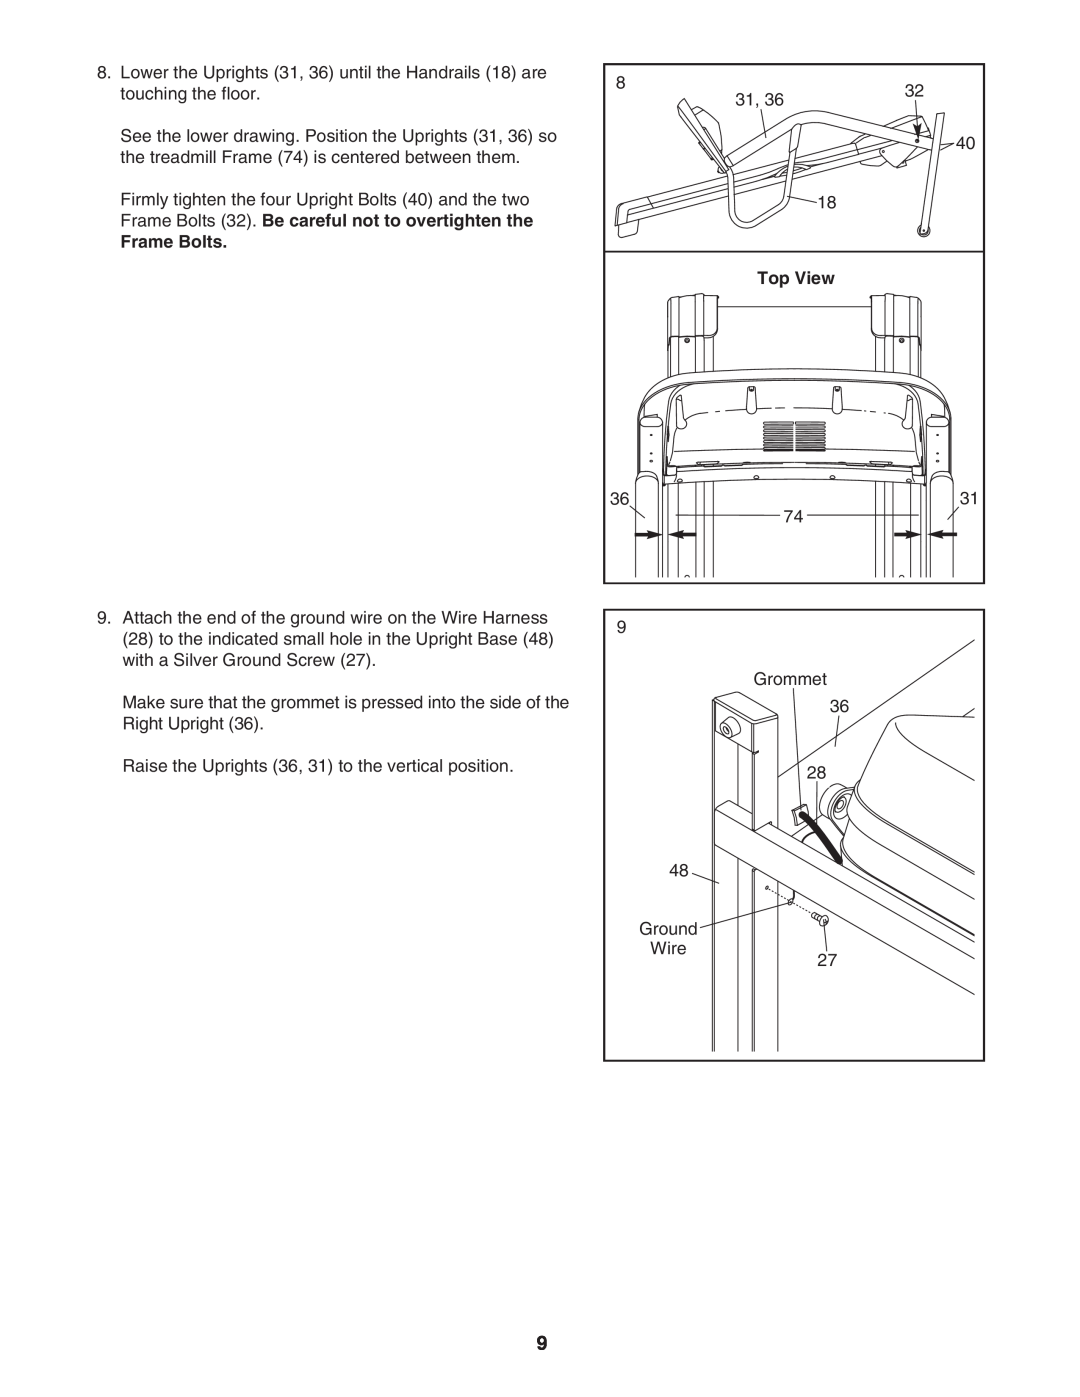 Image IMTL49105.0 user manual Frame Bolts, Top View 